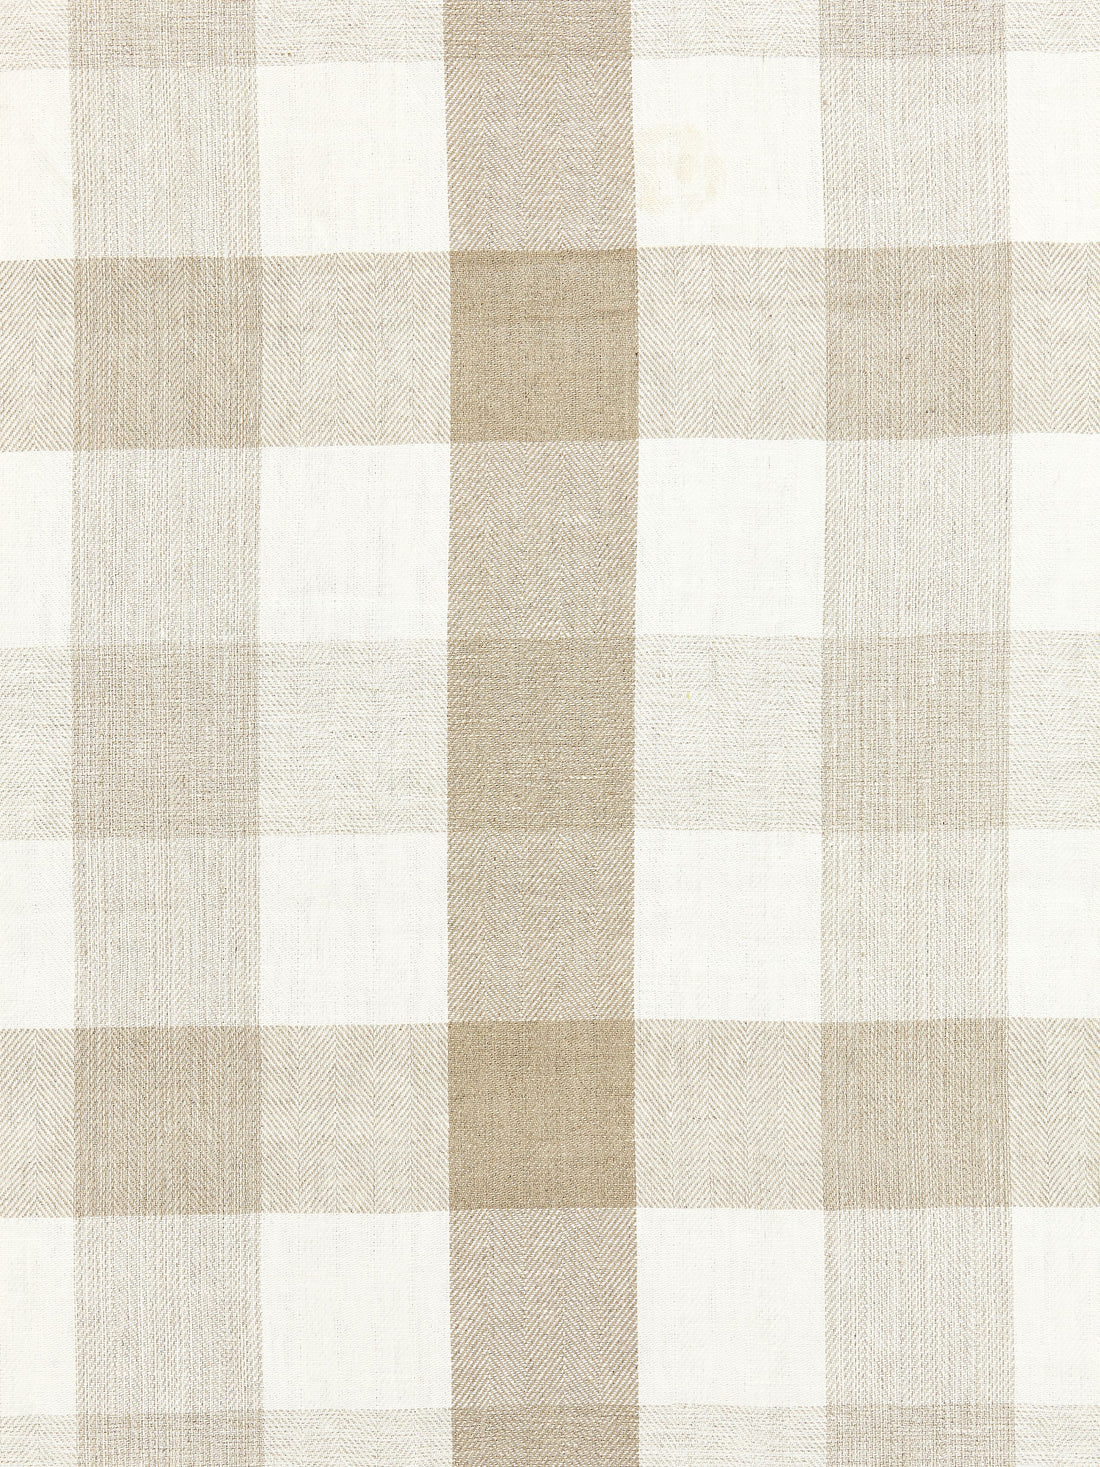 Westport Linen Plaid fabric in linen color - pattern number SC 000127135 - by Scalamandre in the Scalamandre Fabrics Book 1 collection